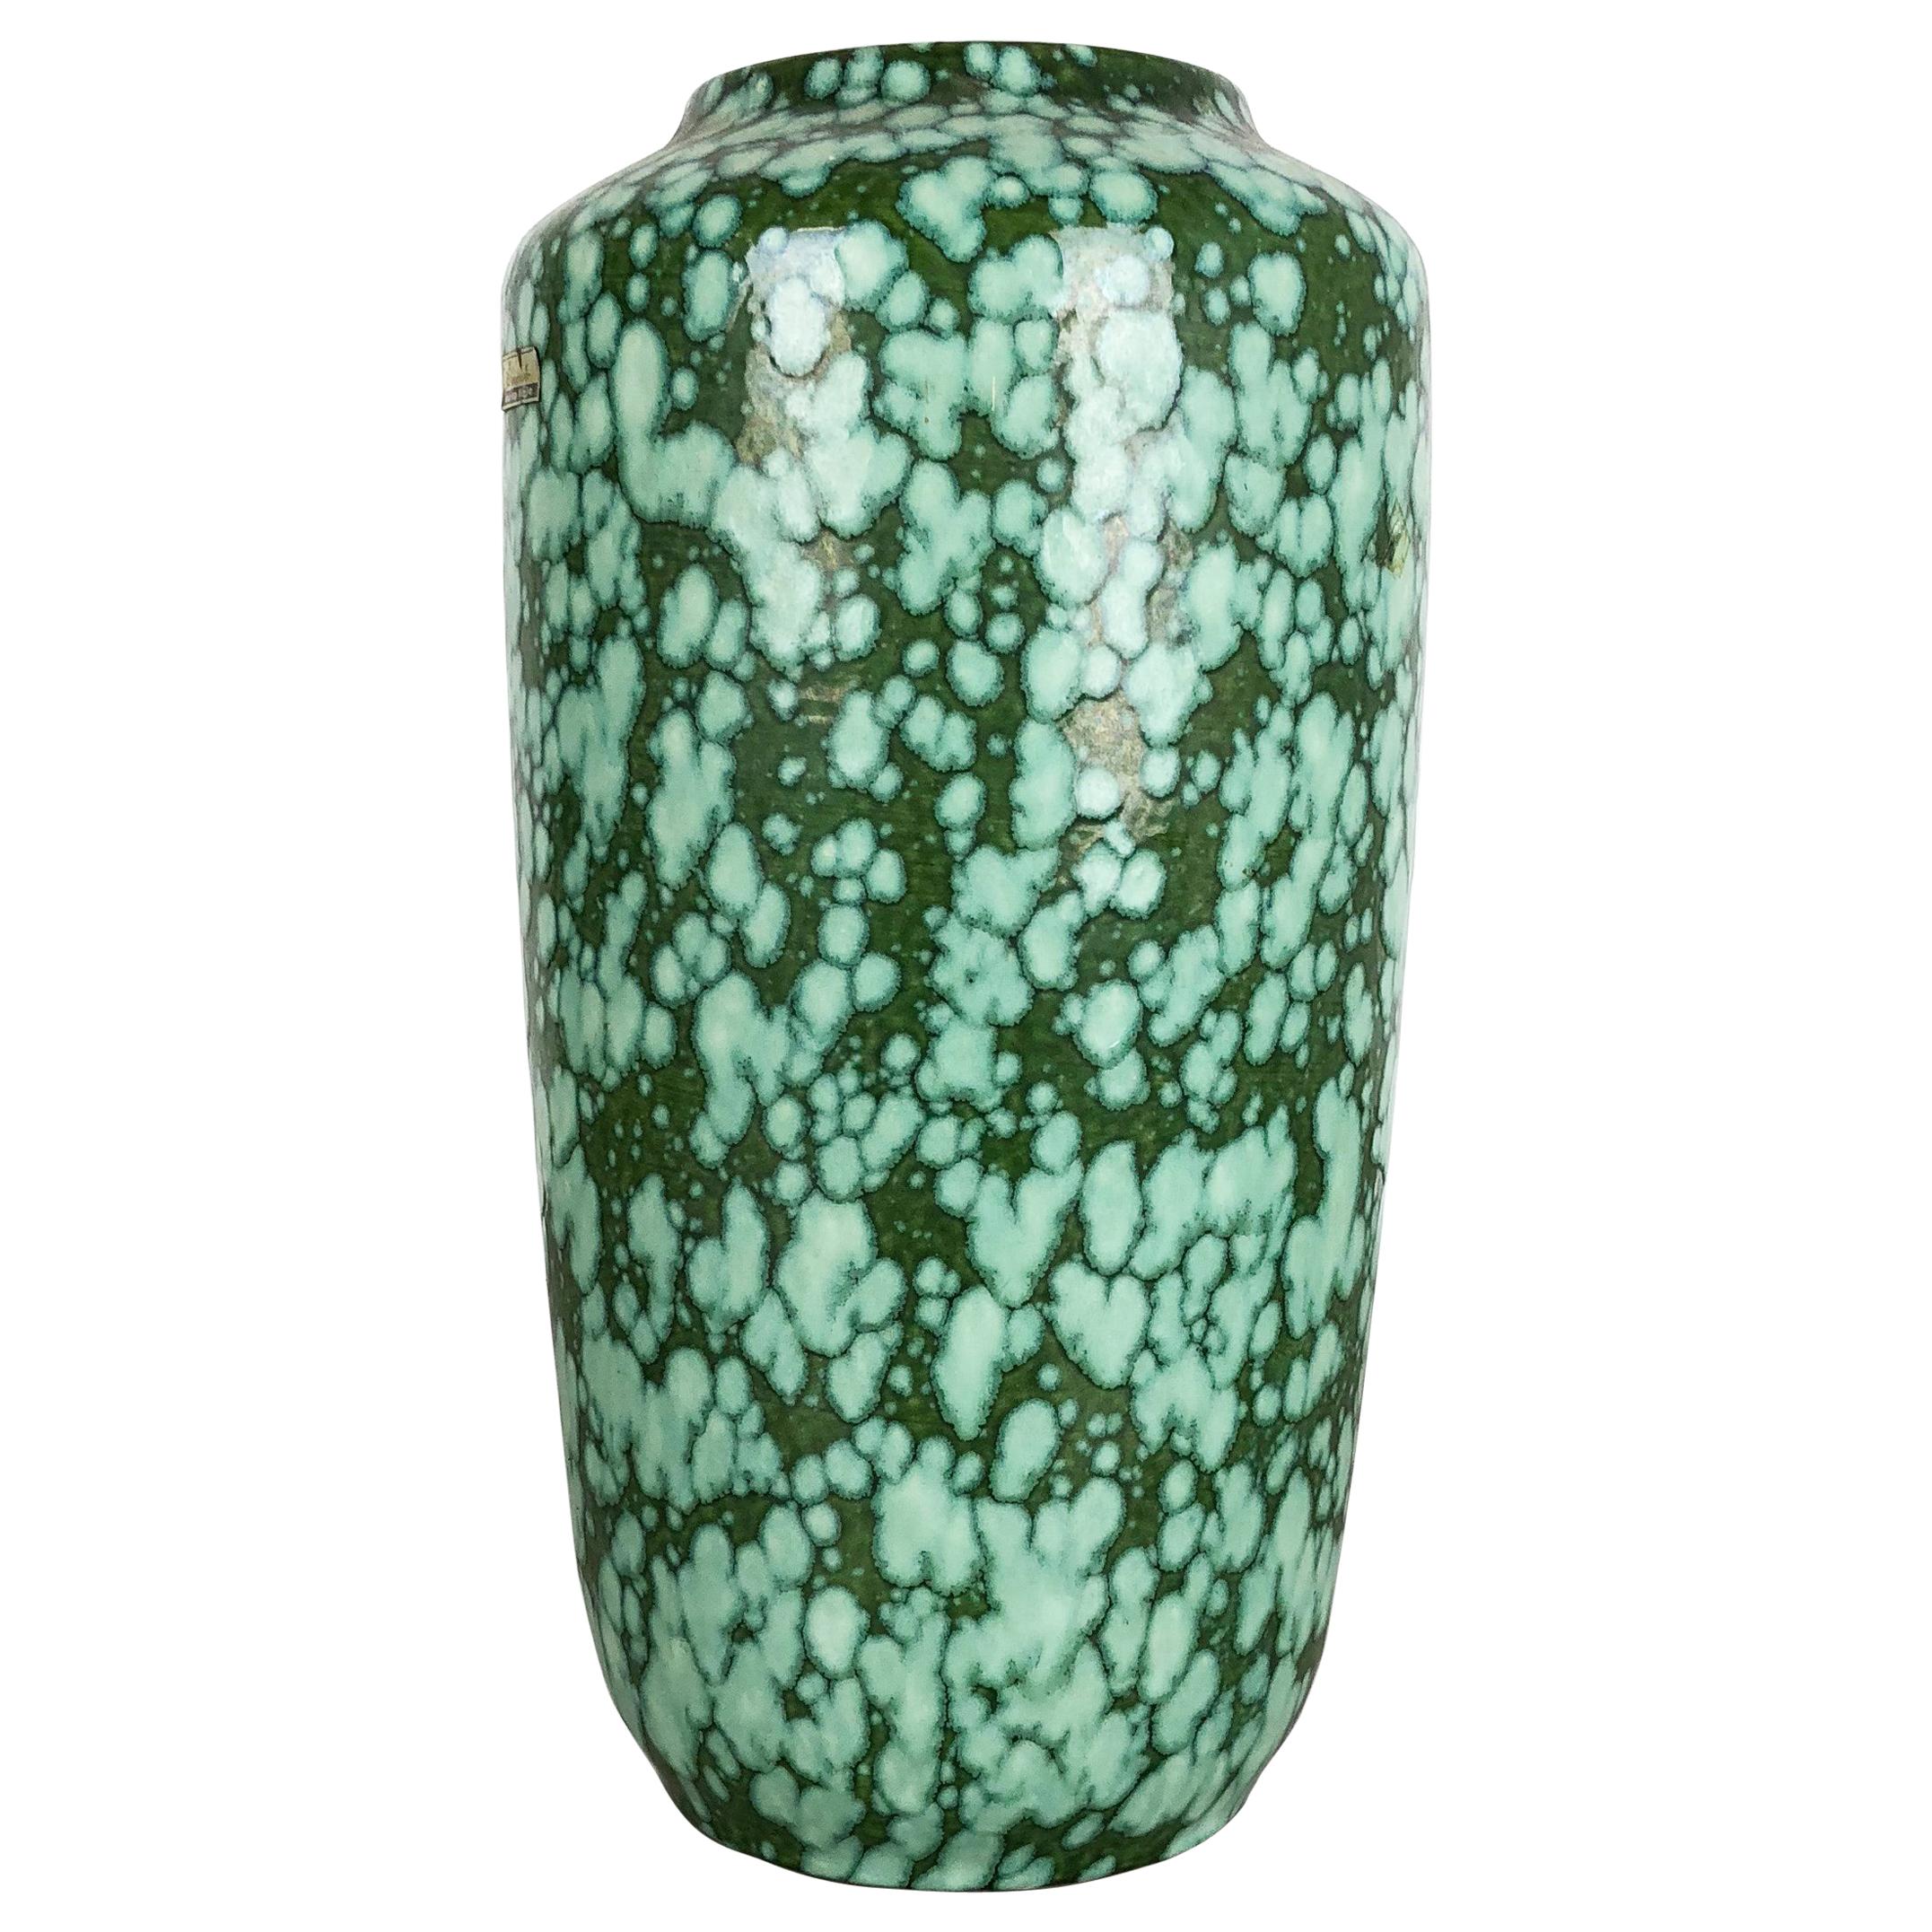 Extra Large Floorvase Fat Lava "517-38" Vase by Scheurich, Germany, 1970s